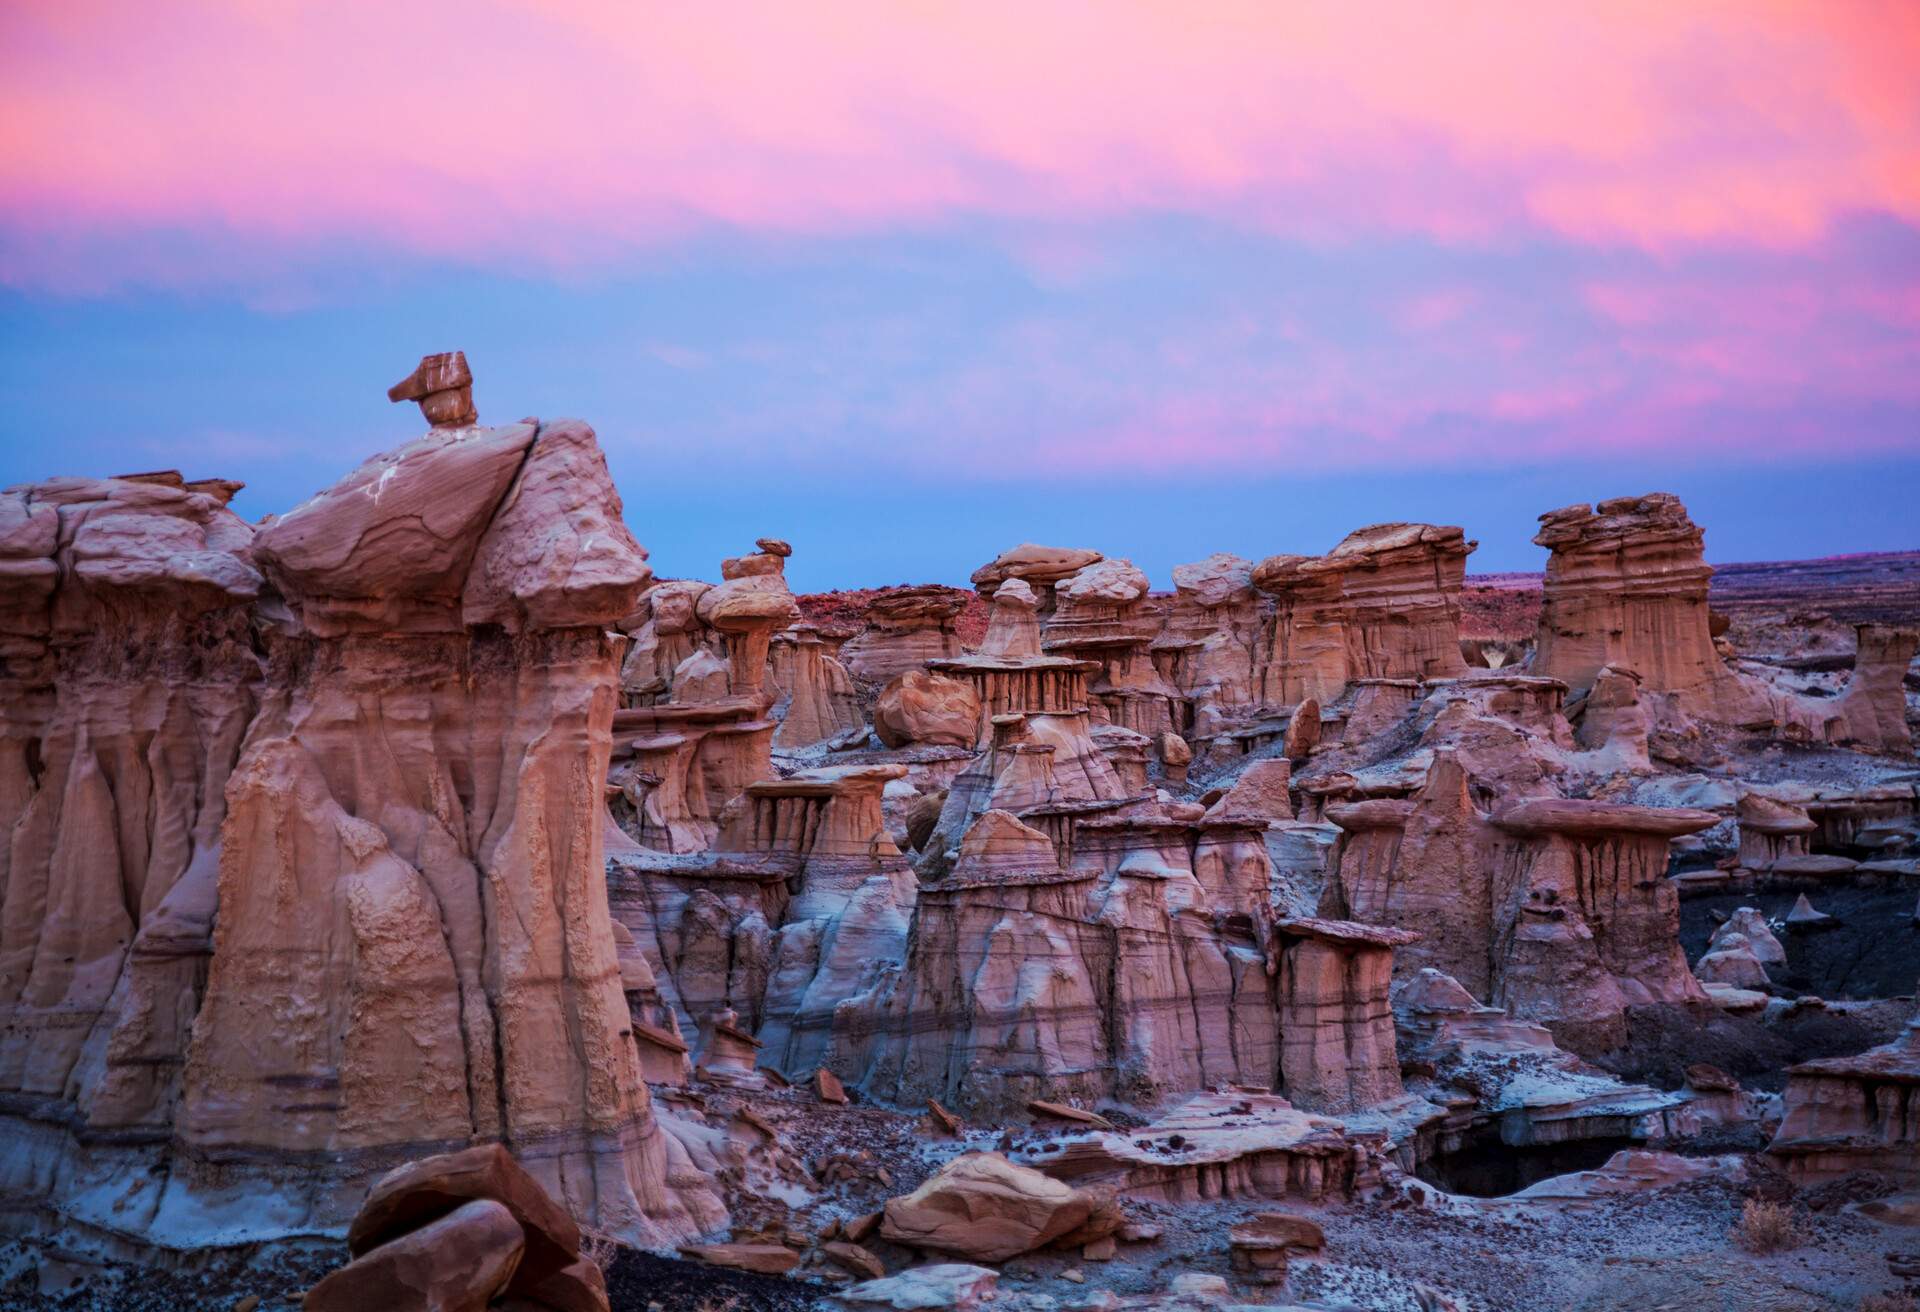 A beautiful sunset augments the wonderful badlands landscape of Ah Shi Sle Pah wilderness in New Mexico